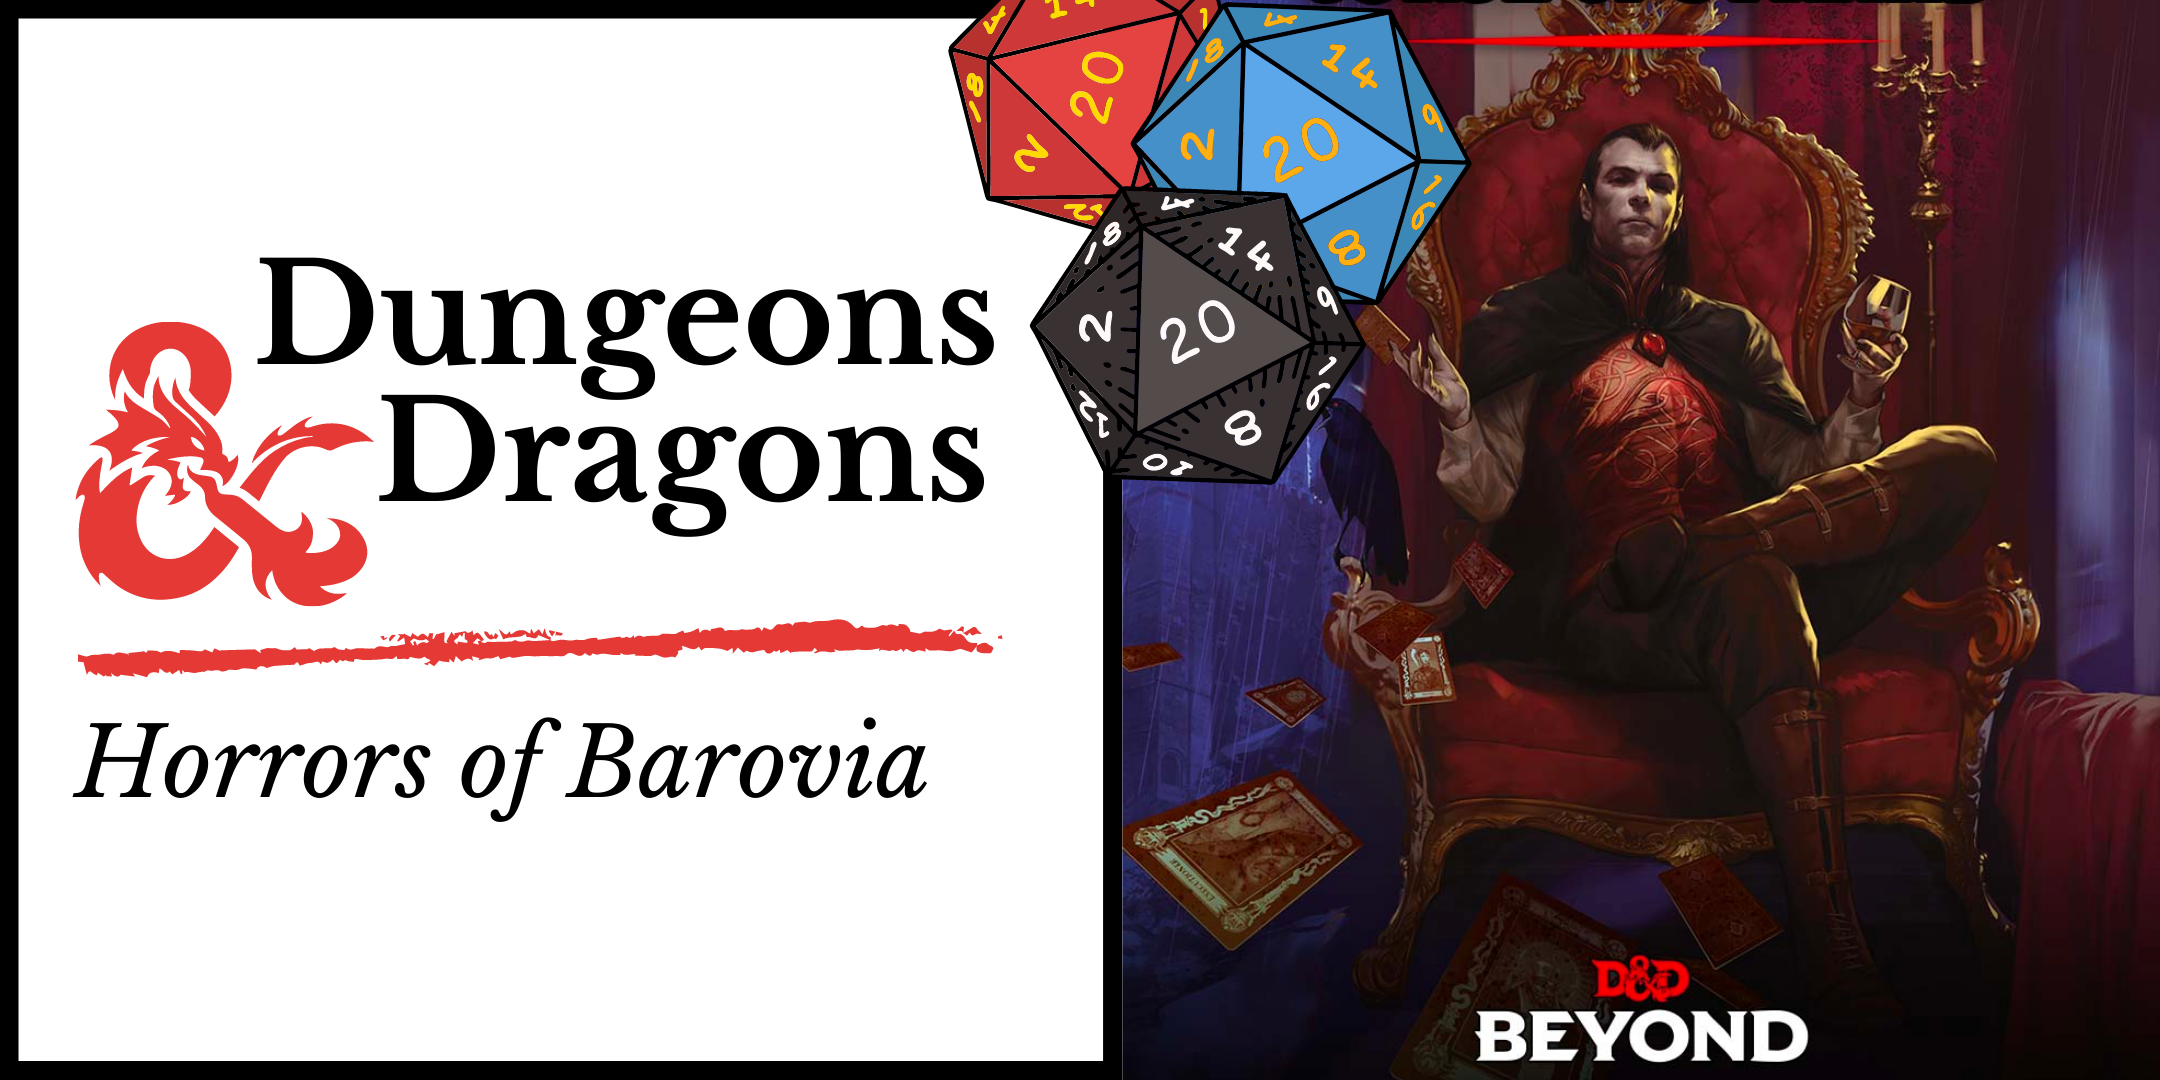 image of "Dungeons & Dragons: Horrors of Barovia"